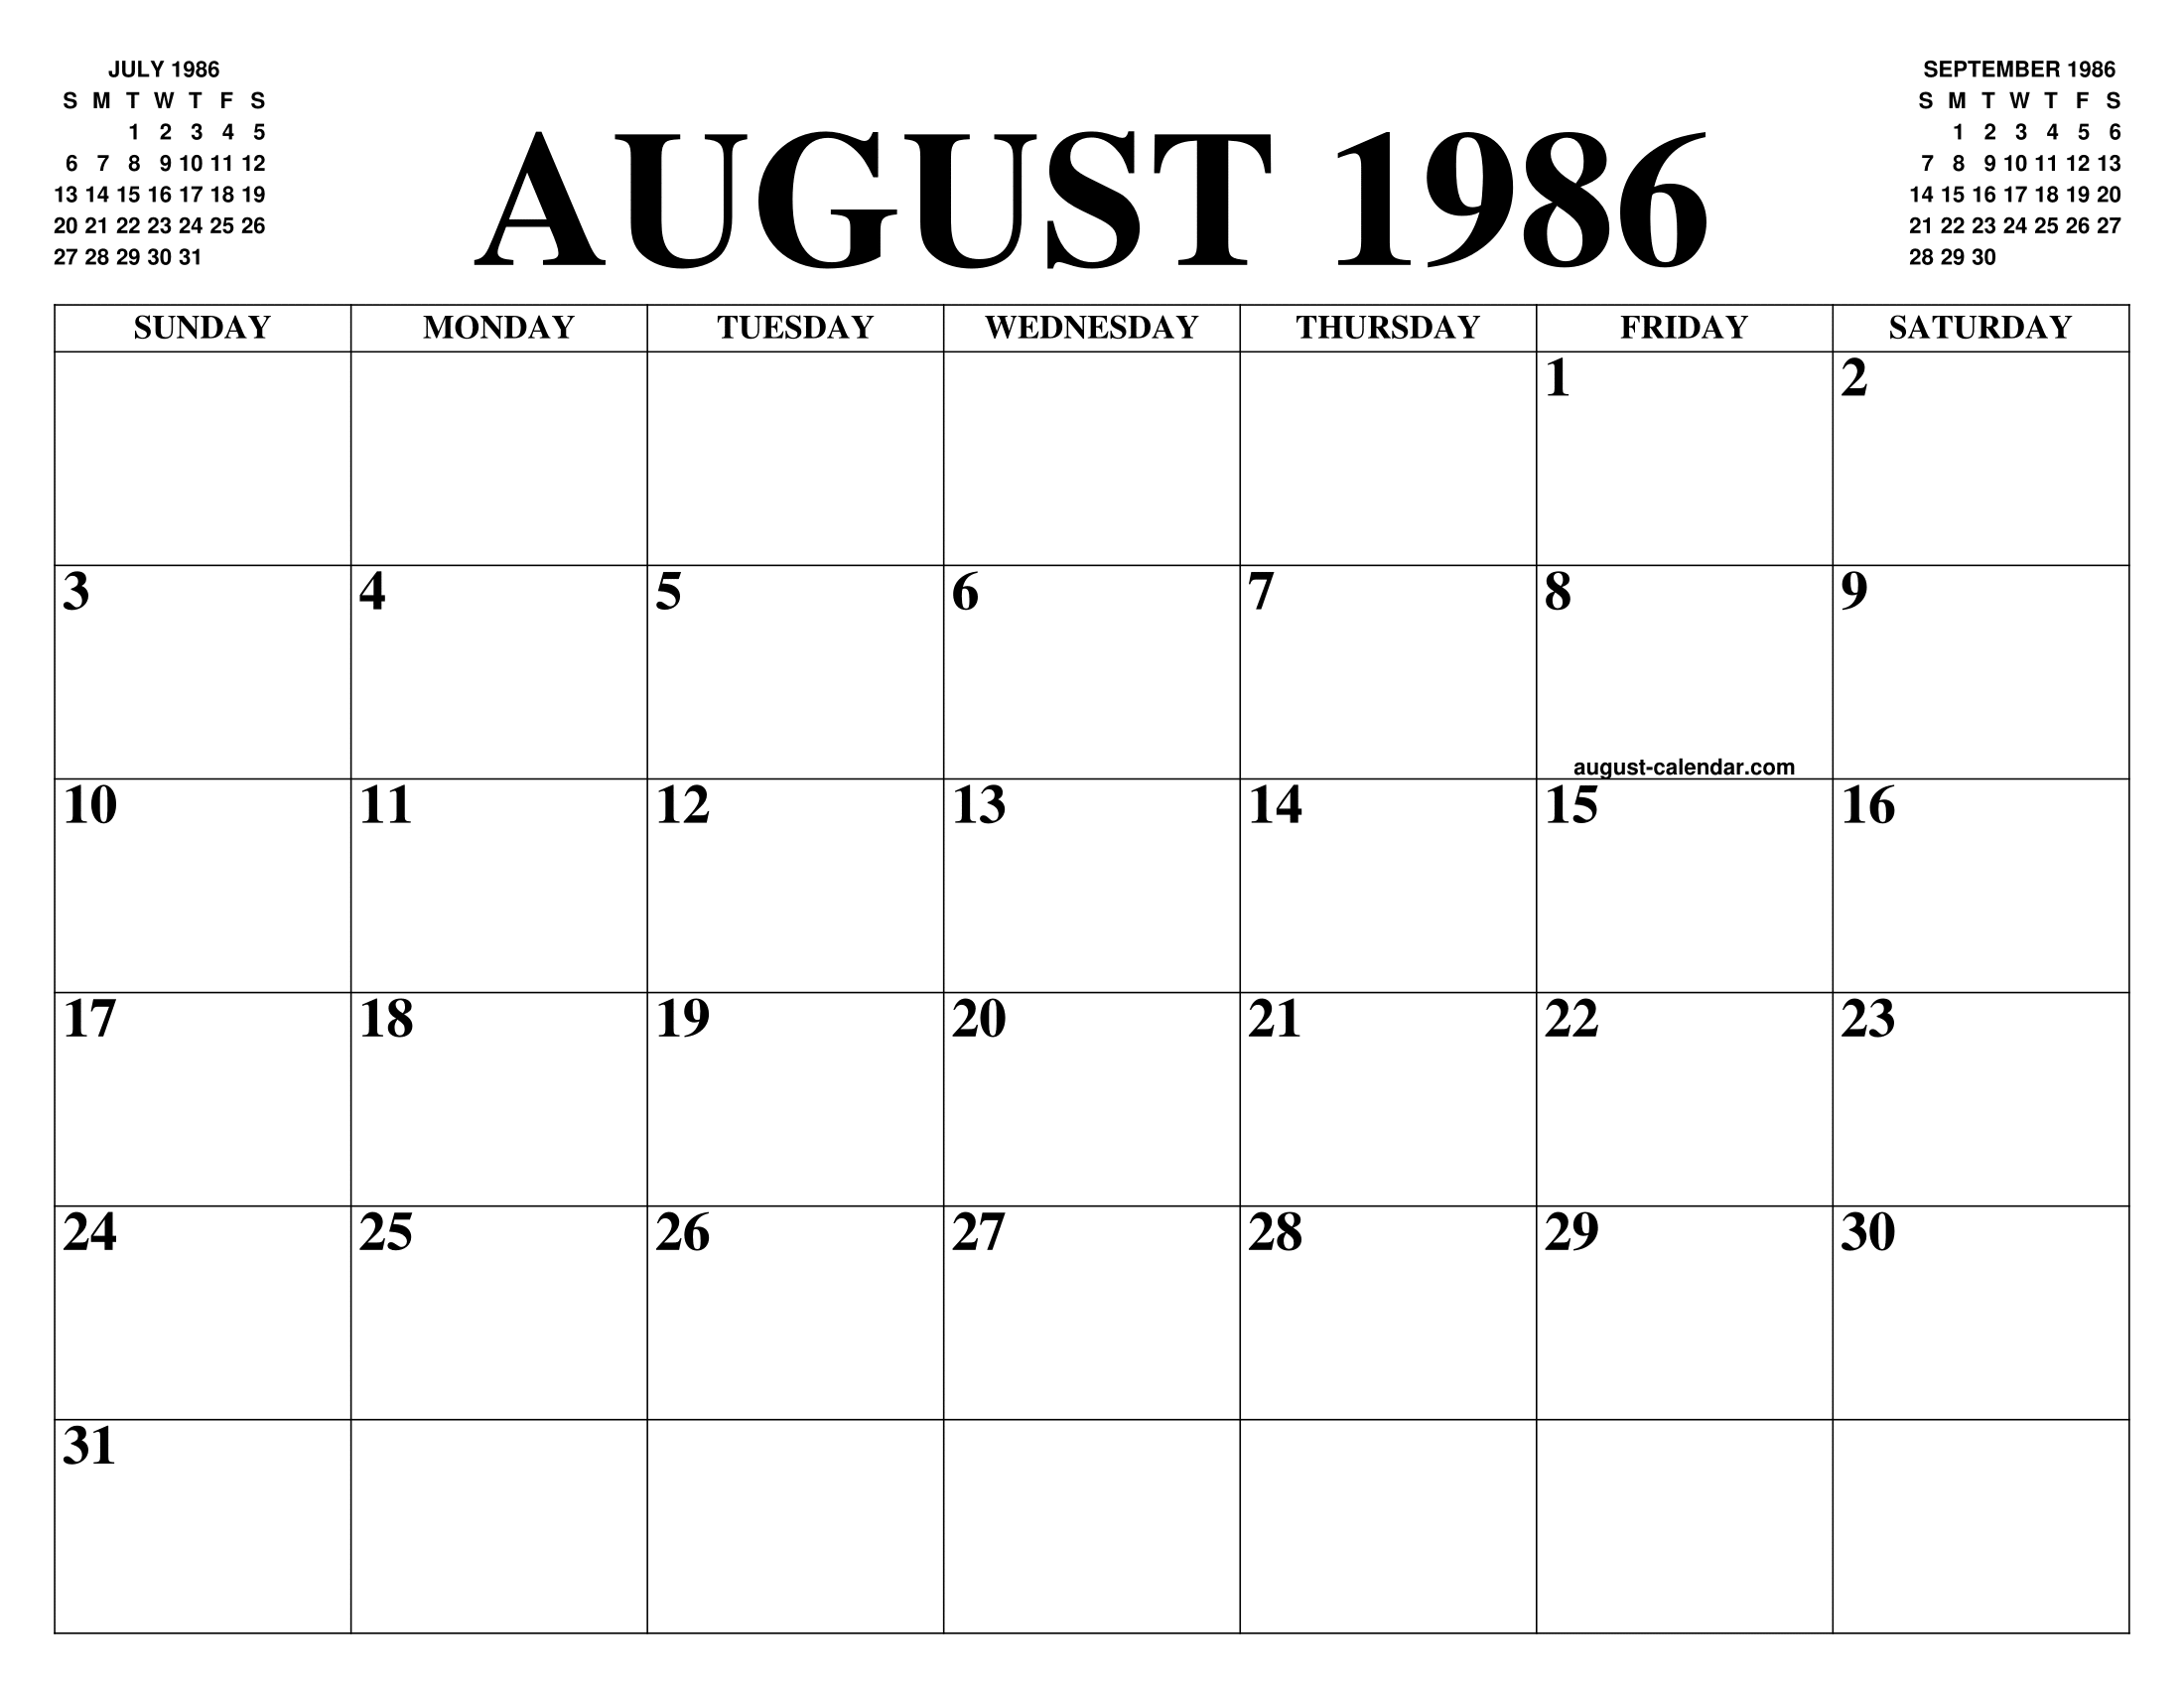 AUGUST 1986 CALENDAR OF THE MONTH: FREE PRINTABLE AUGUST CALENDAR OF